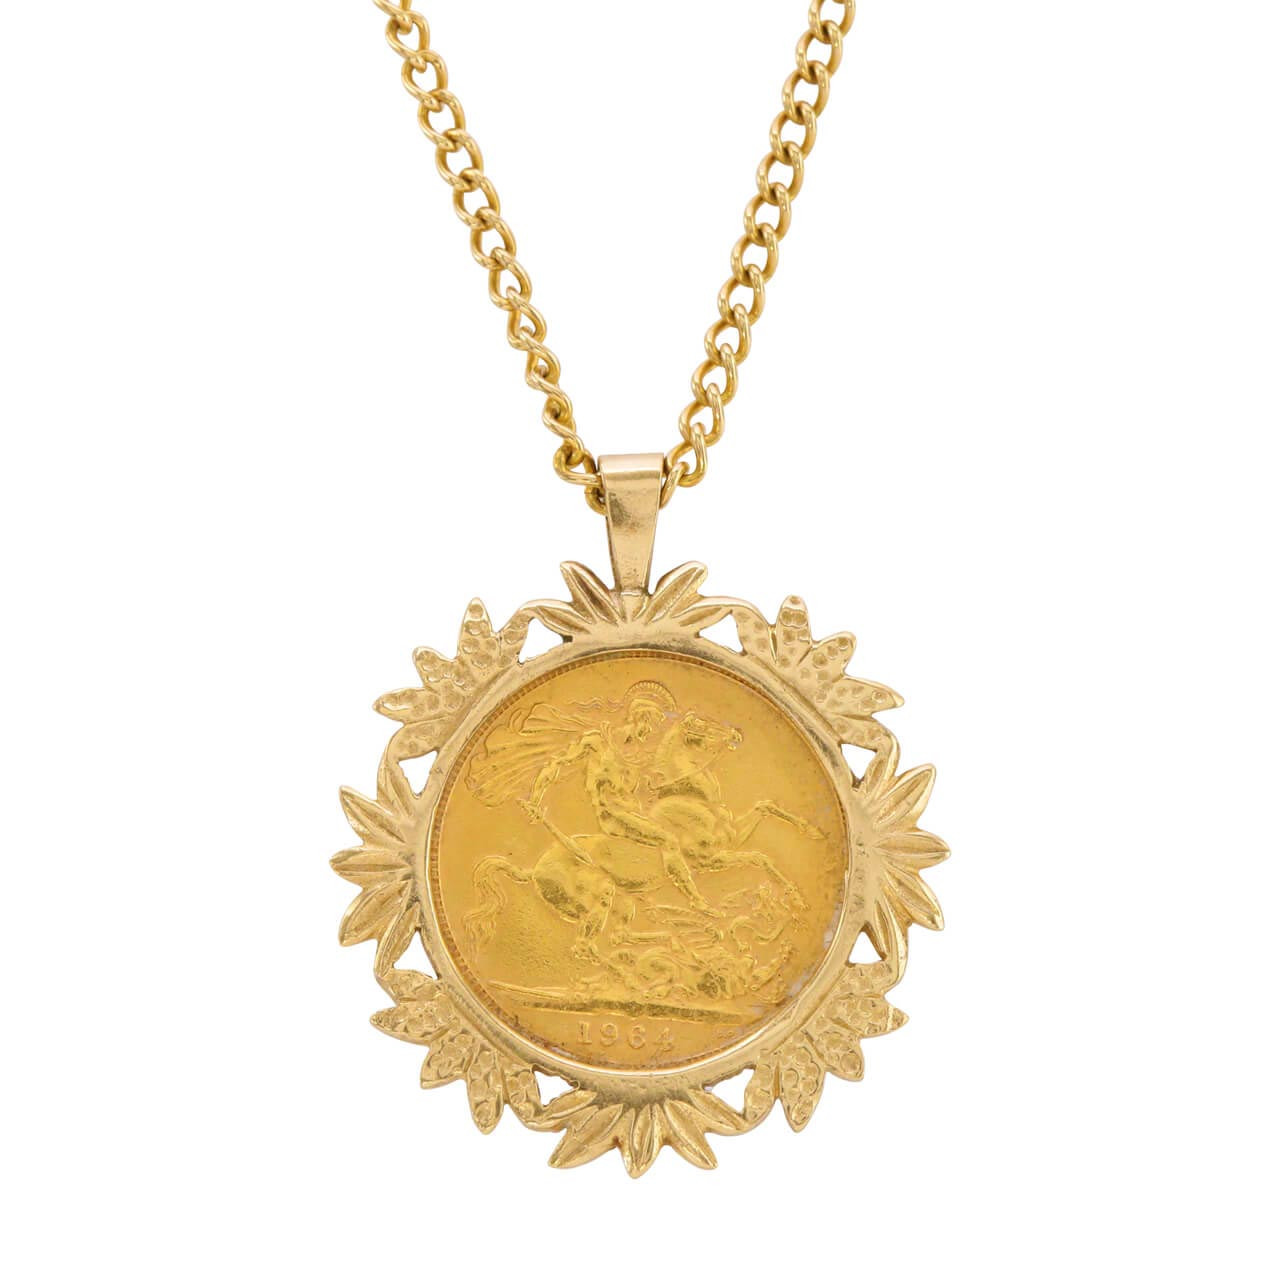 ASOS DESIGN waterproof stainless steel necklace with gold coin pendant in  gold tone | ASOS